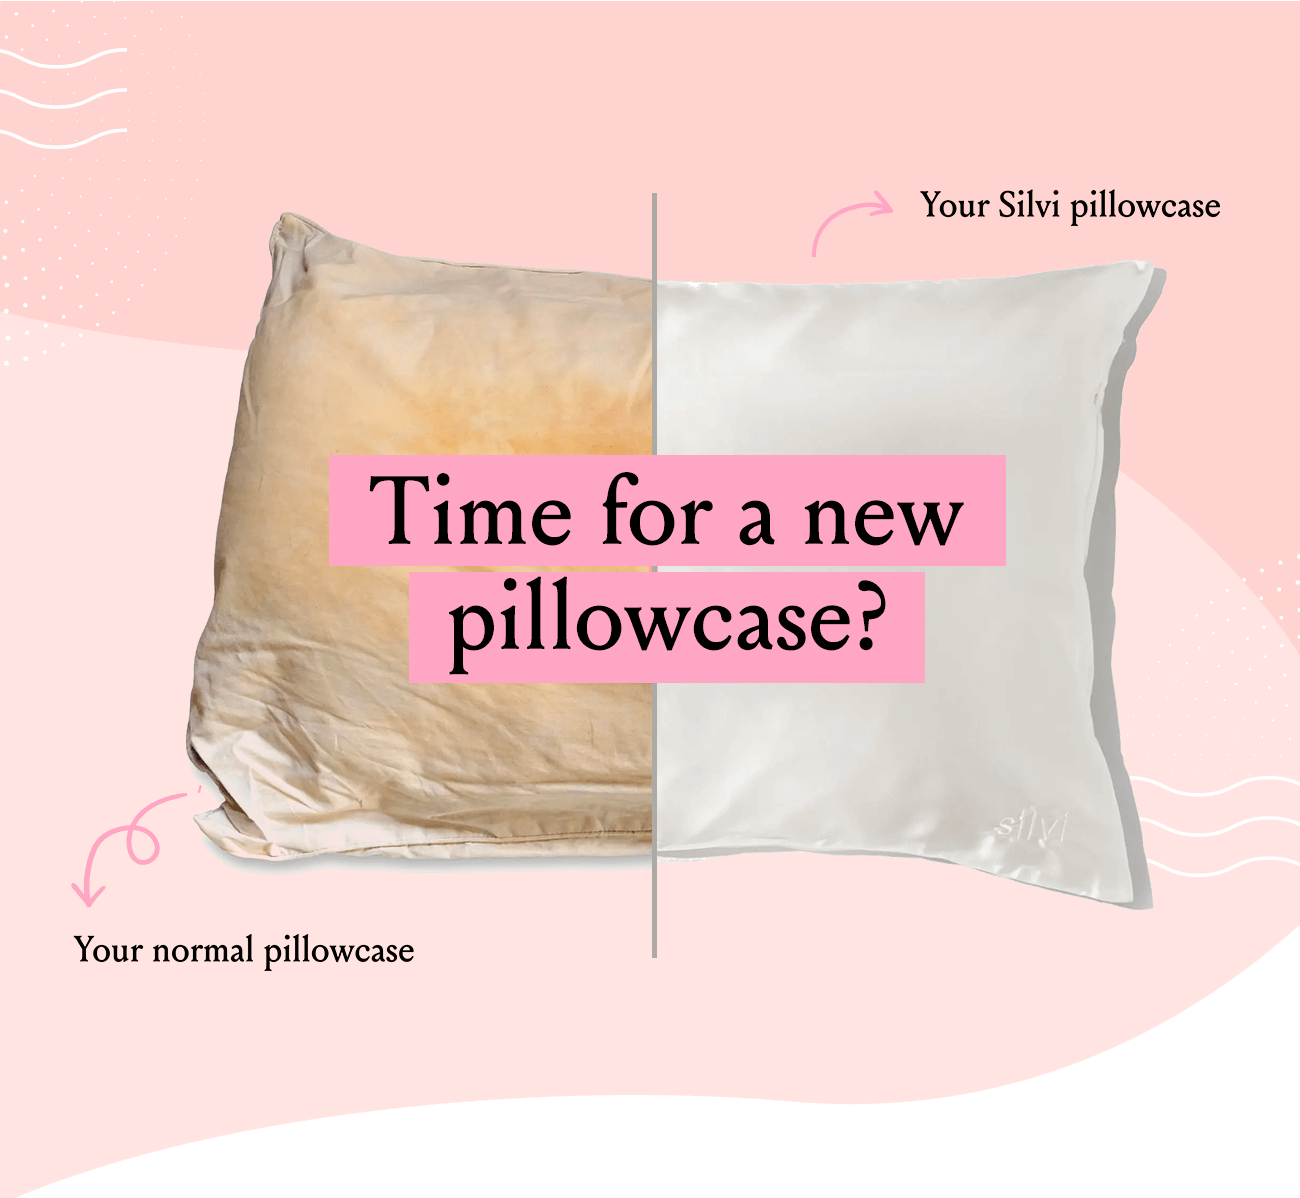 Time for a new pillowcase? Here’s four signs it’s time to make the switch to Silvi